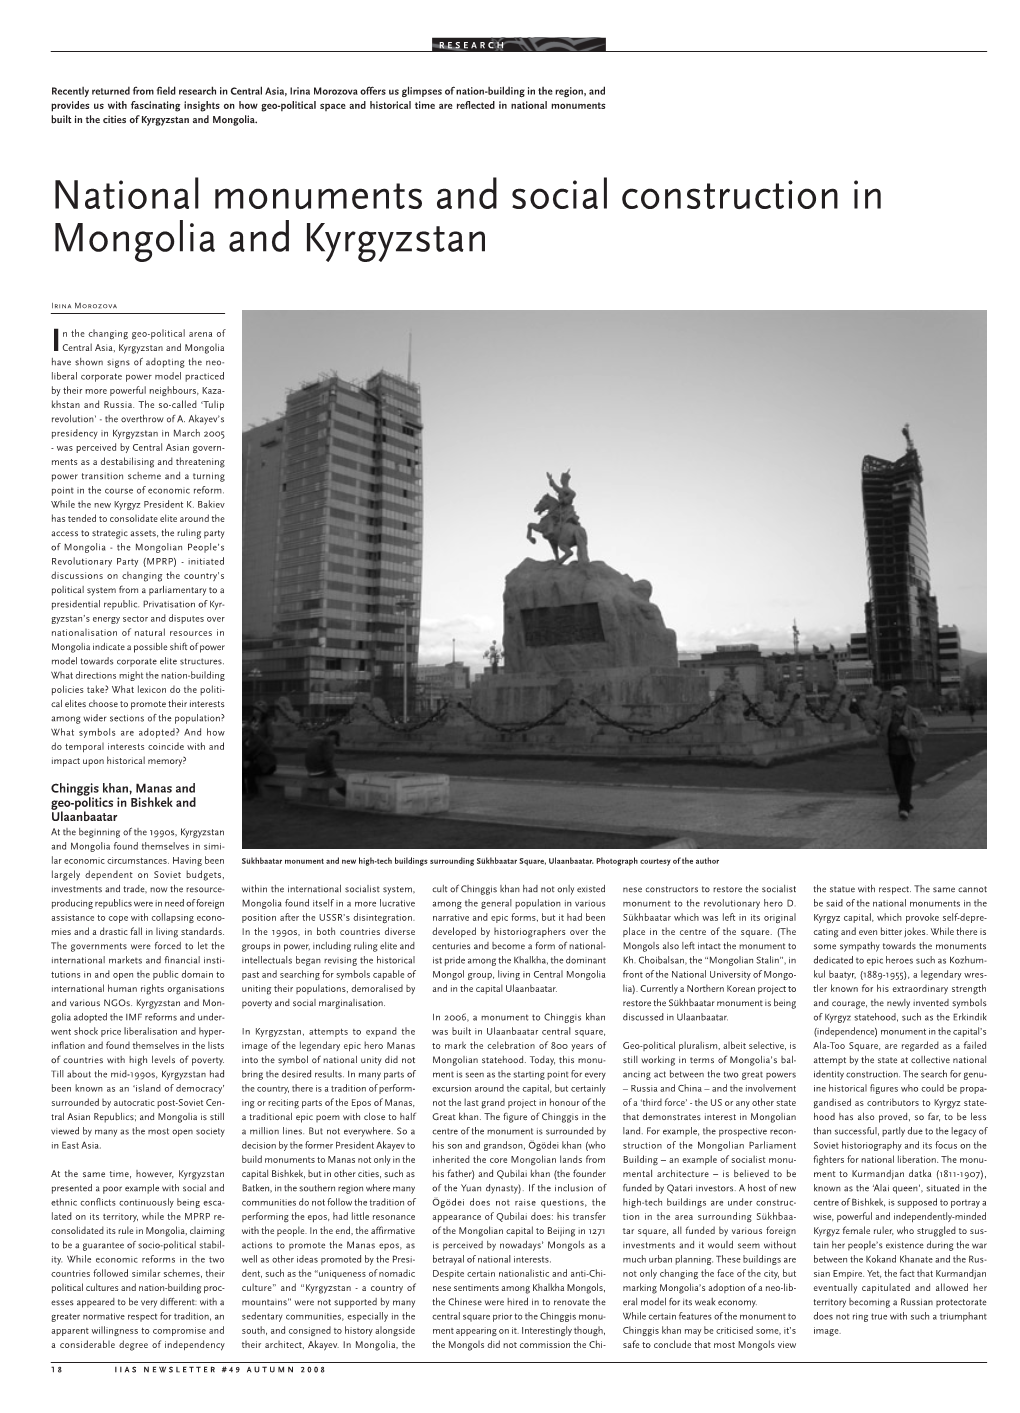 National Monuments and Social Construction in Mongolia and Kyrgyzstan